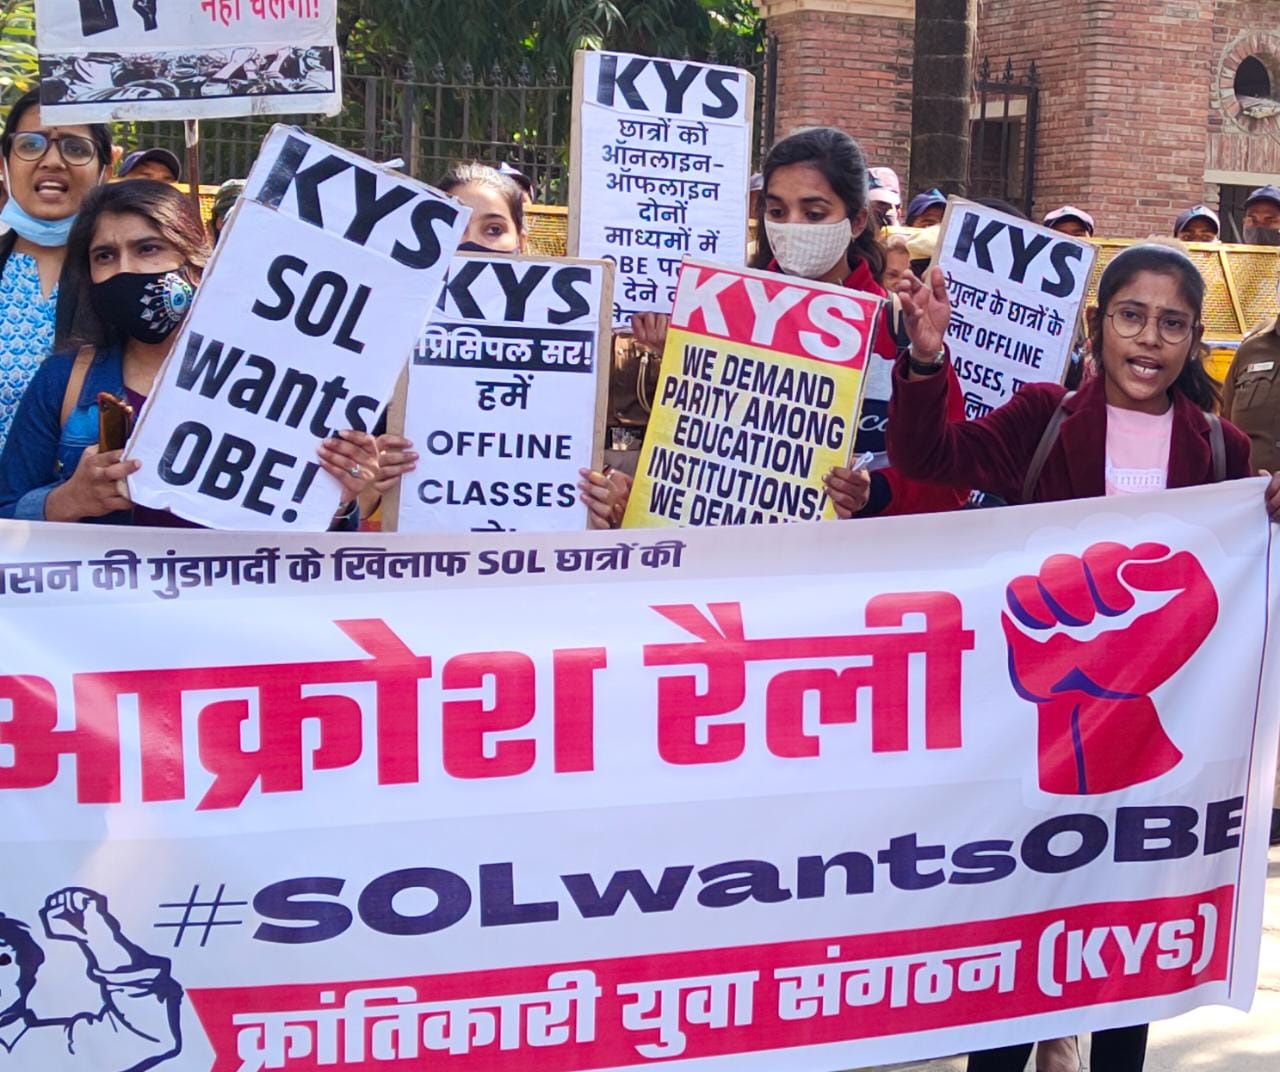 Delhi University protests: student outfit rallies against alleged misconduct by administration